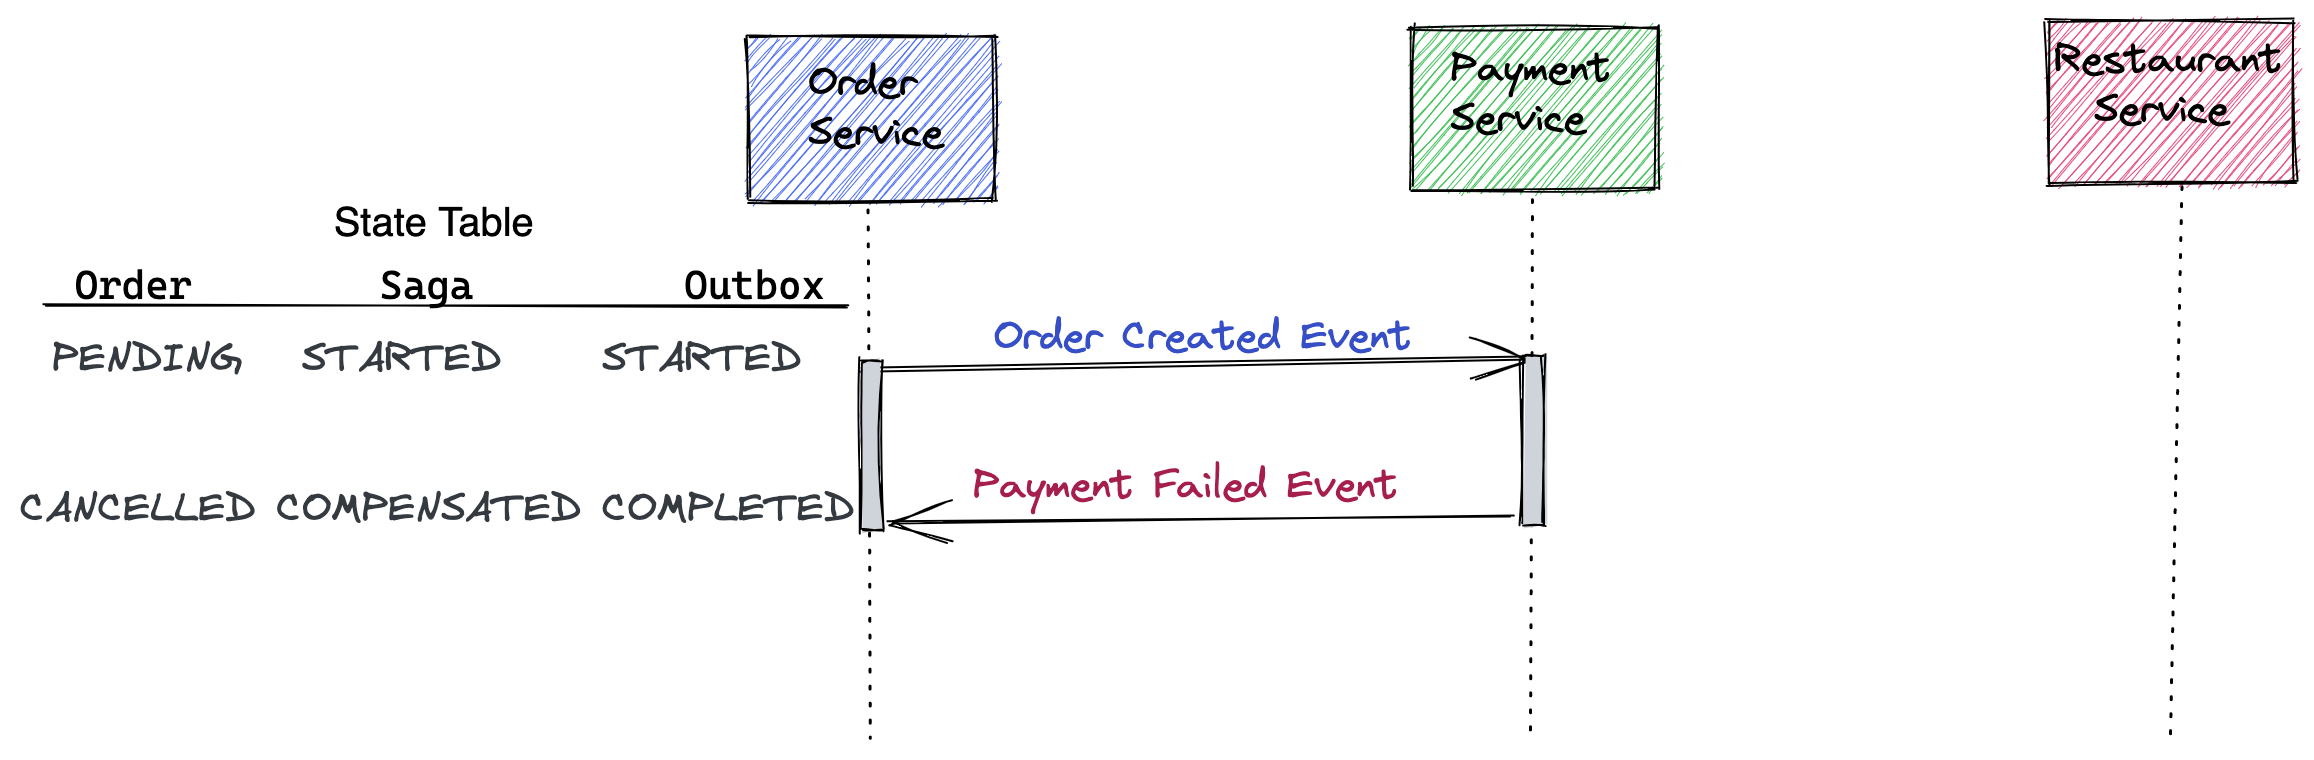 outbox payment failure